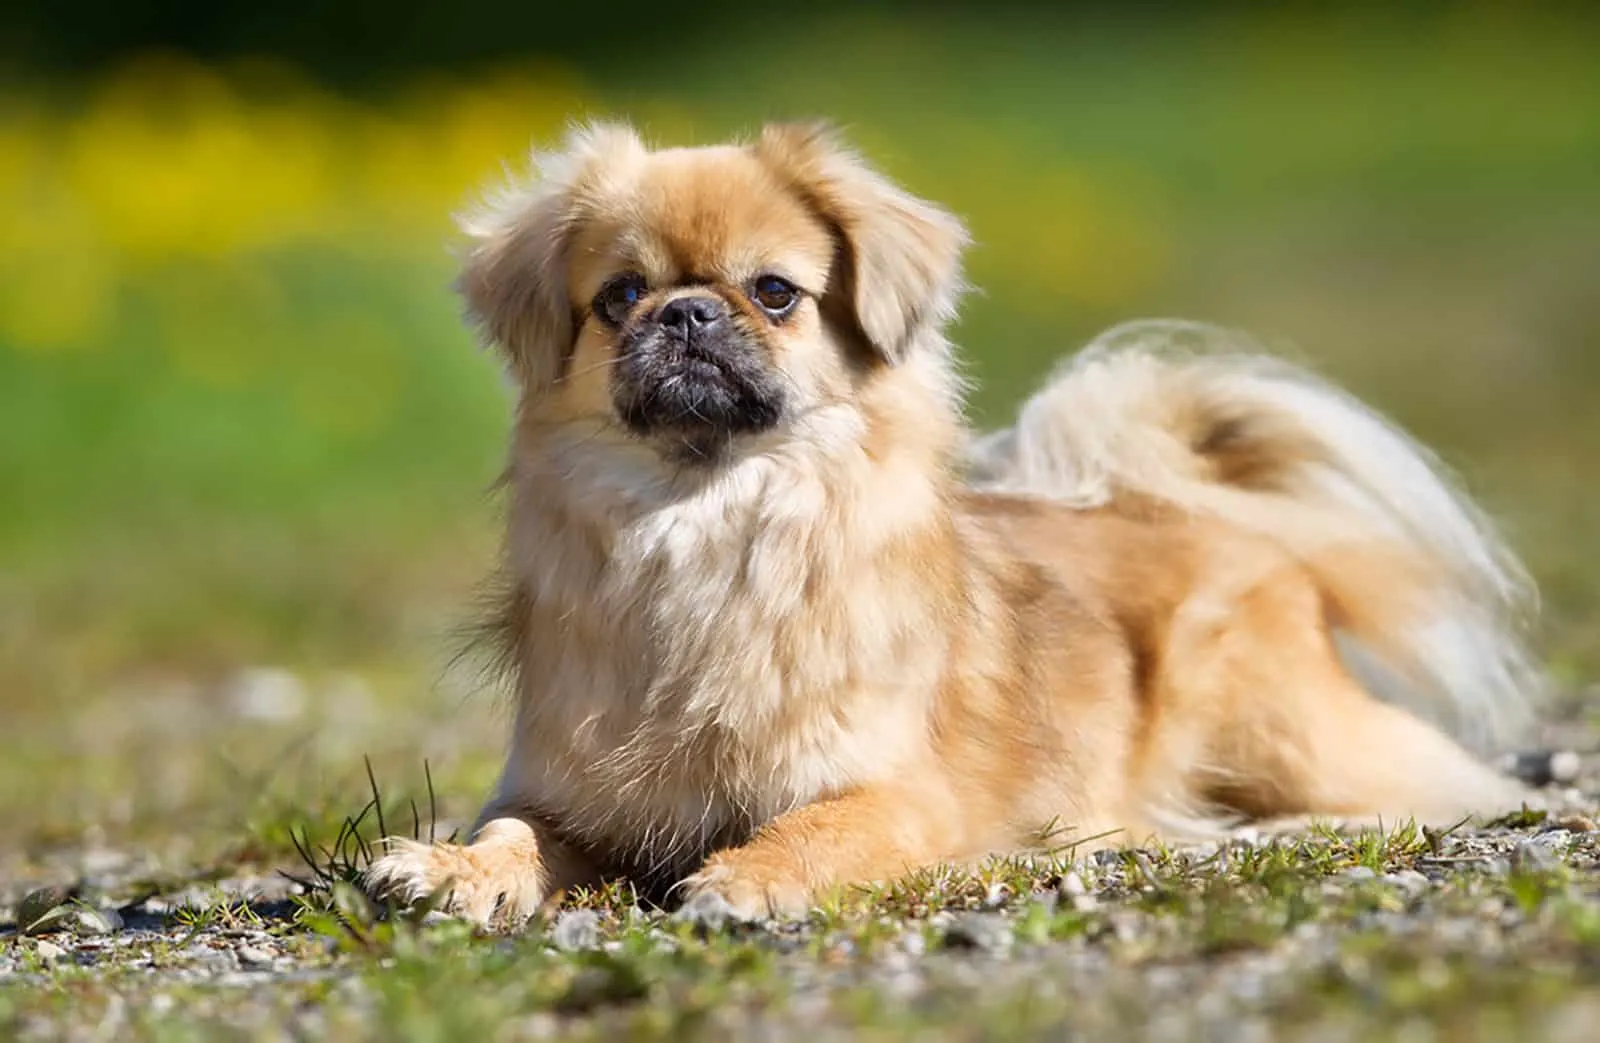 tibetan spaniel dog outdoors in the nature on grass meadow